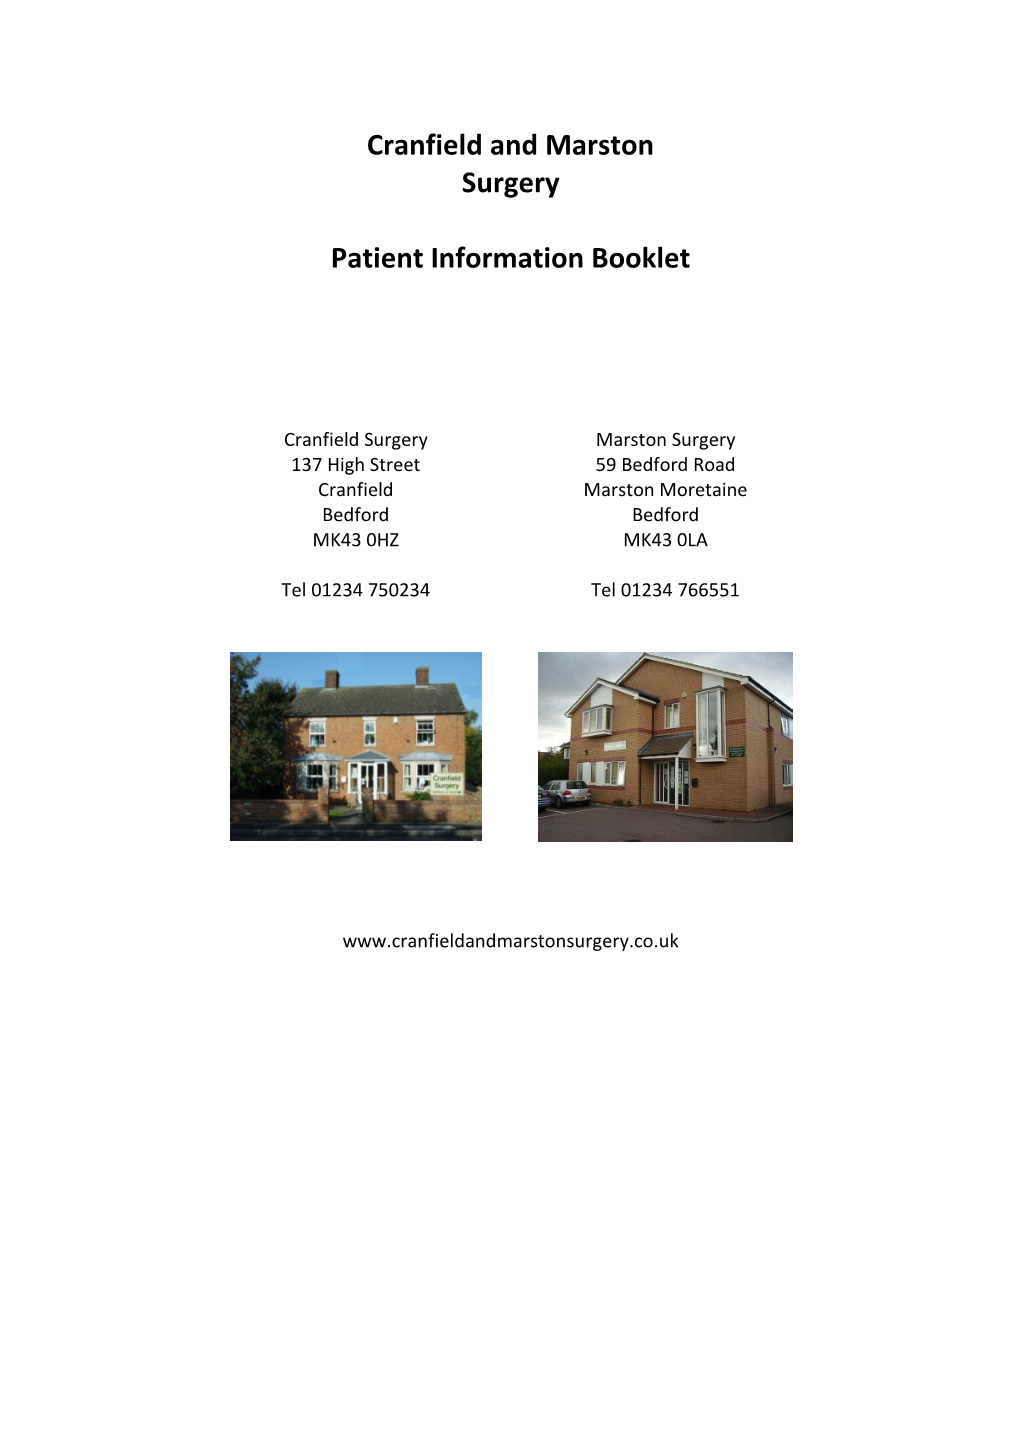 Cranfield and Marston Surgery Patient Information Booklet